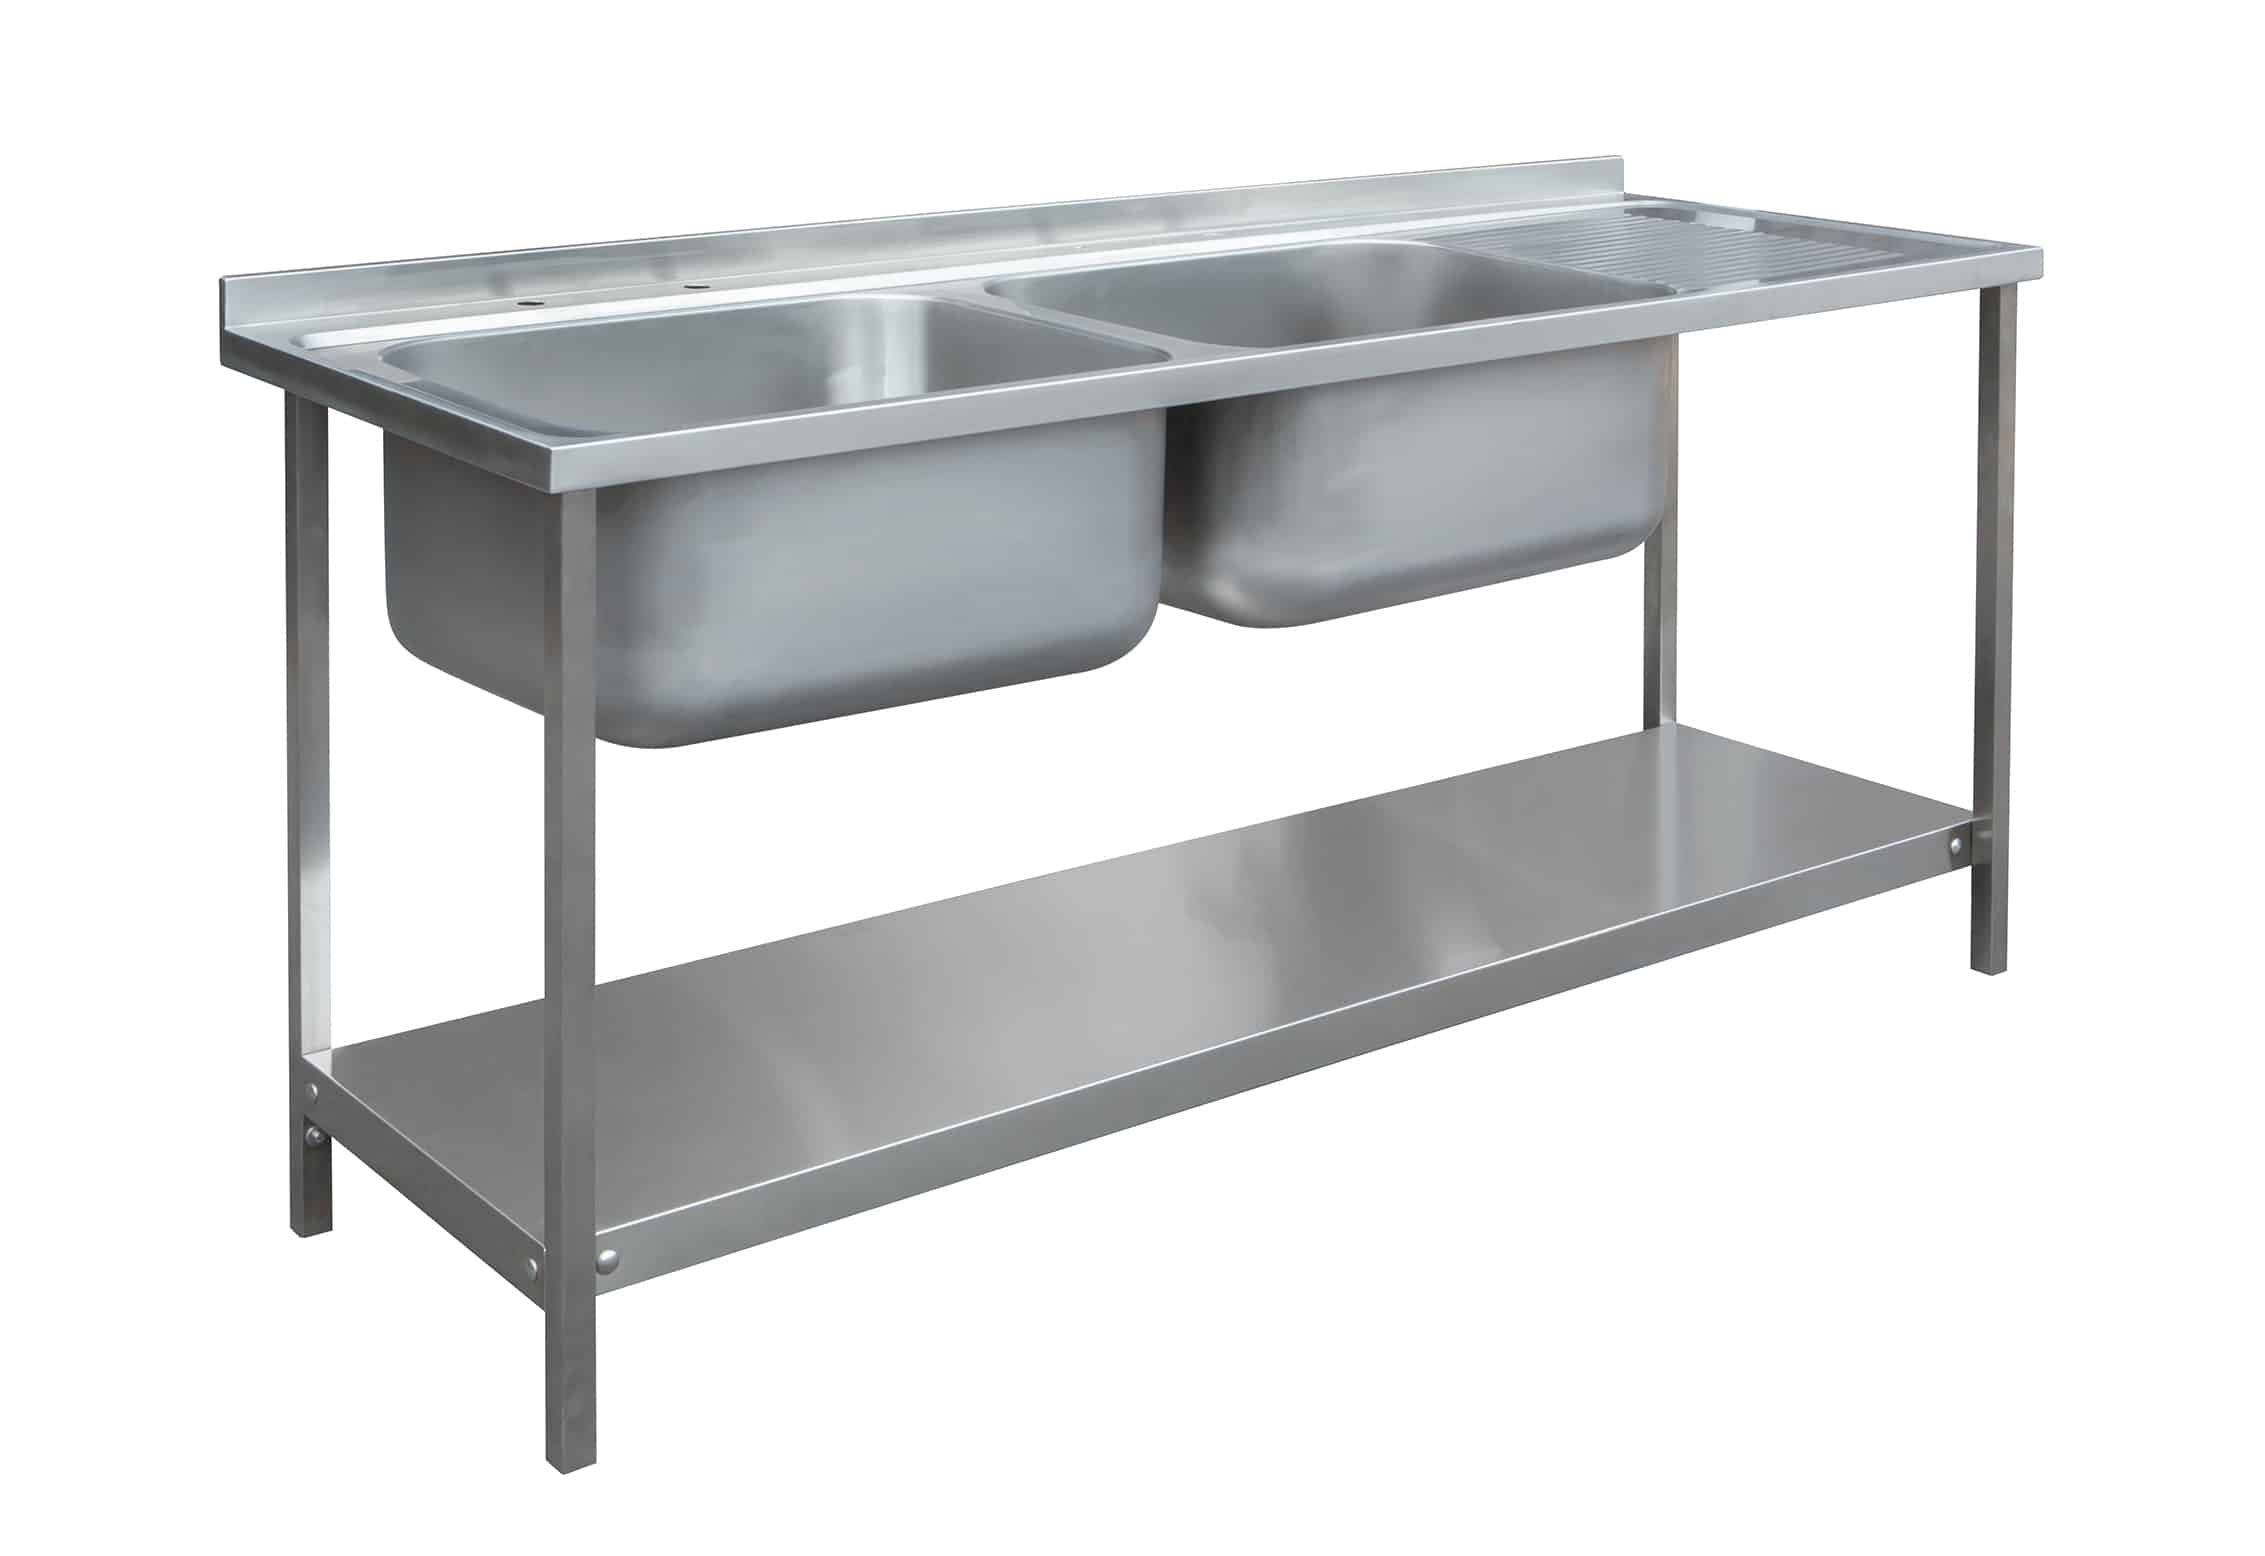 Stainless steel double bowl sink with drainer and under shelf